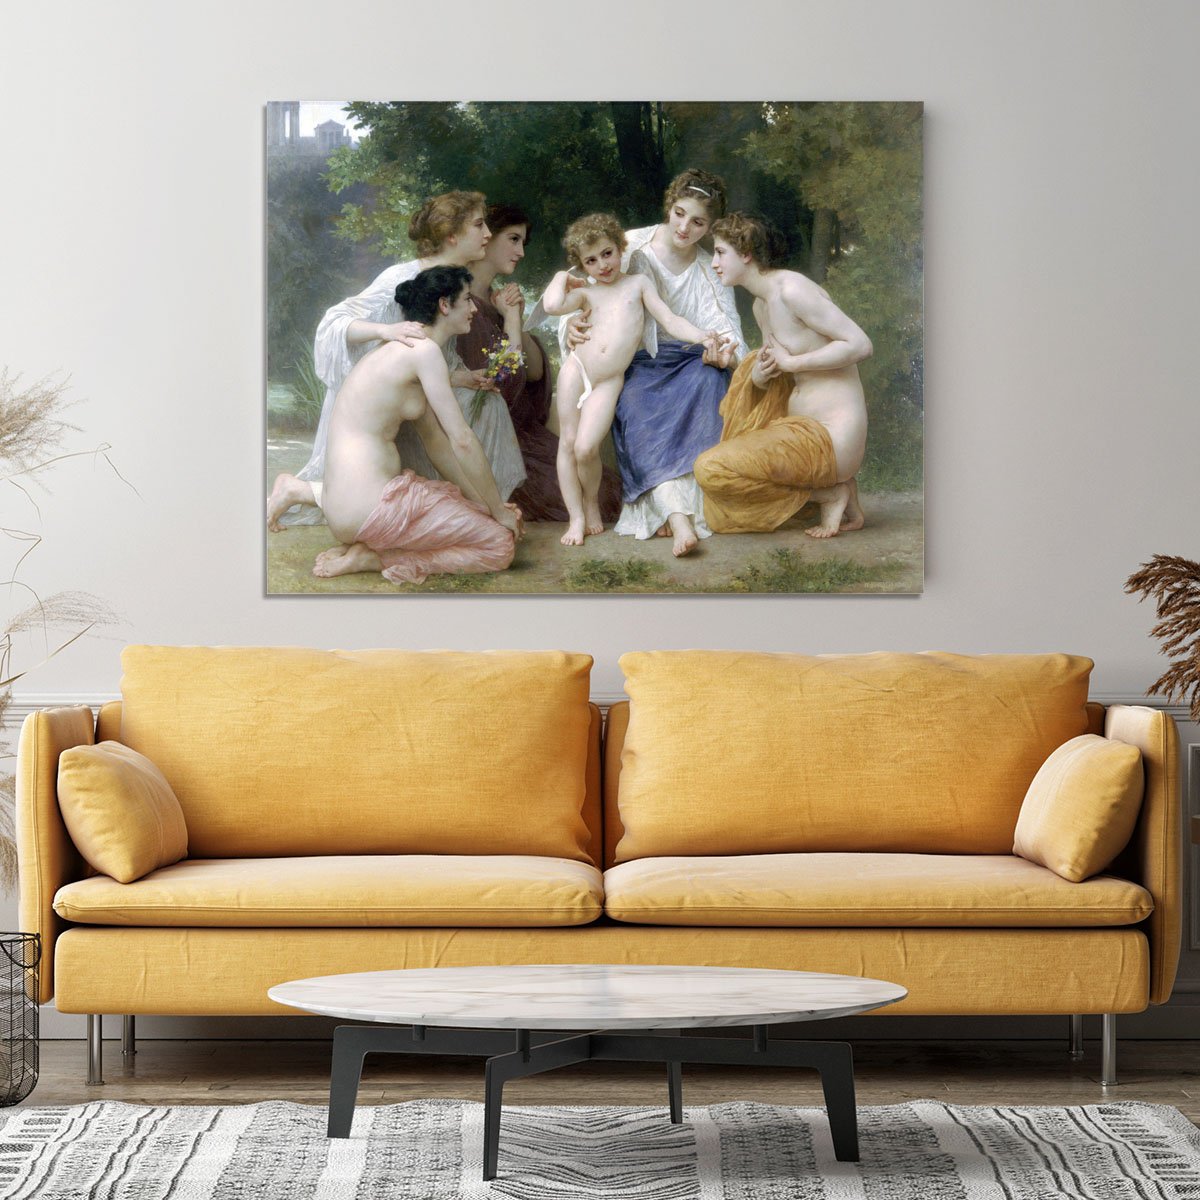 Admiration By Bouguereau Canvas Print or Poster